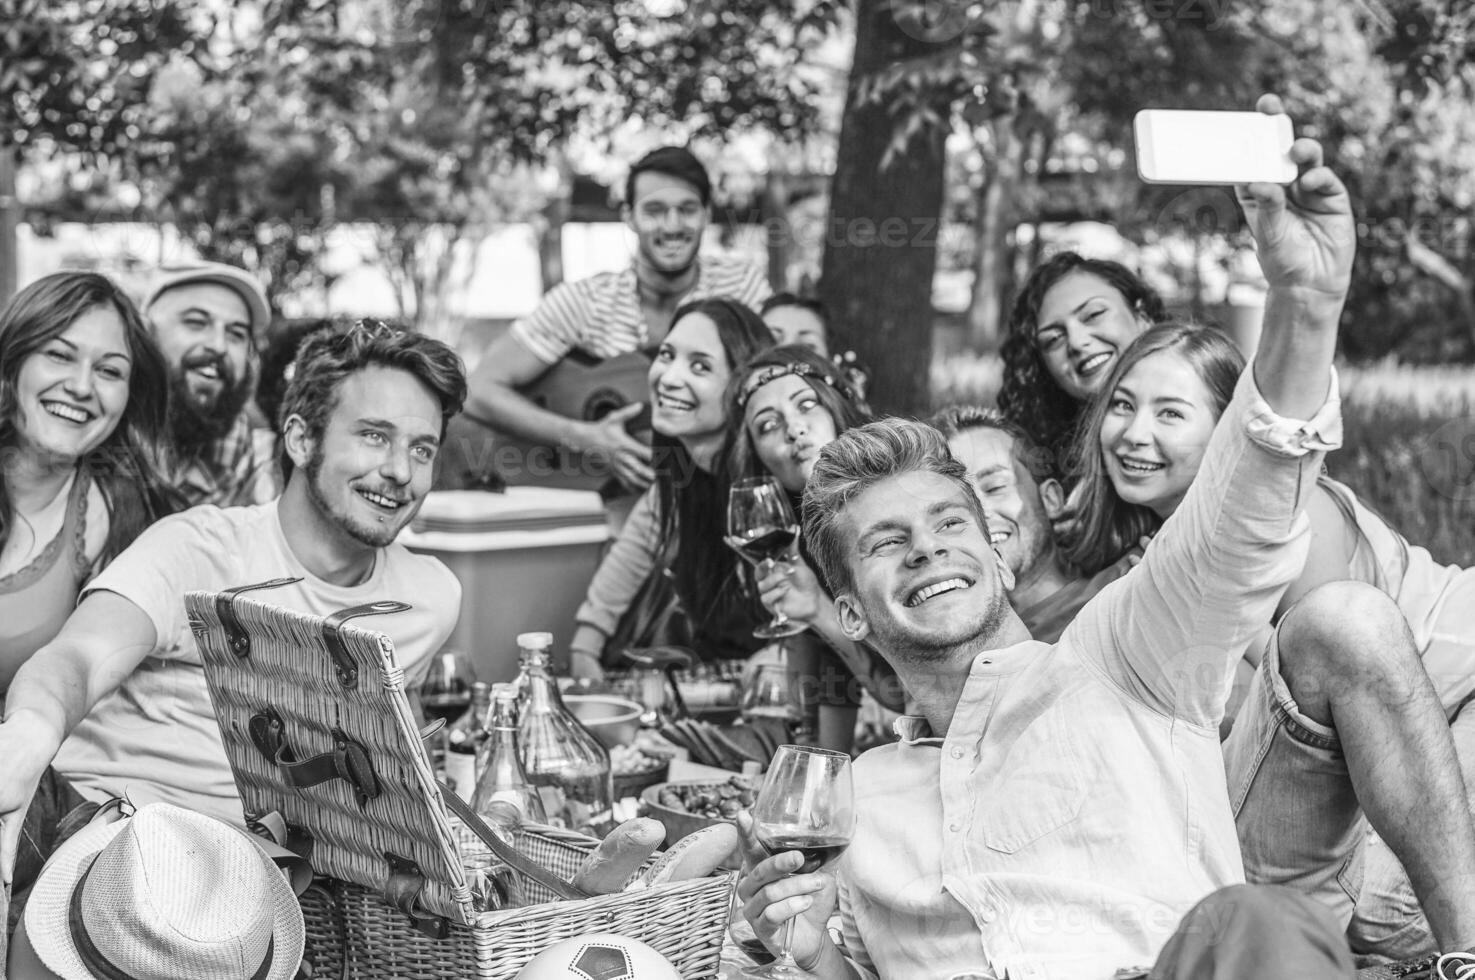 Group of friends making a picnic barbecue and taking selfie with mobile smartphone in park outdoor -
 Happy people having fun together eating and drinking wine - Friendship, youth lifestyle concept photo